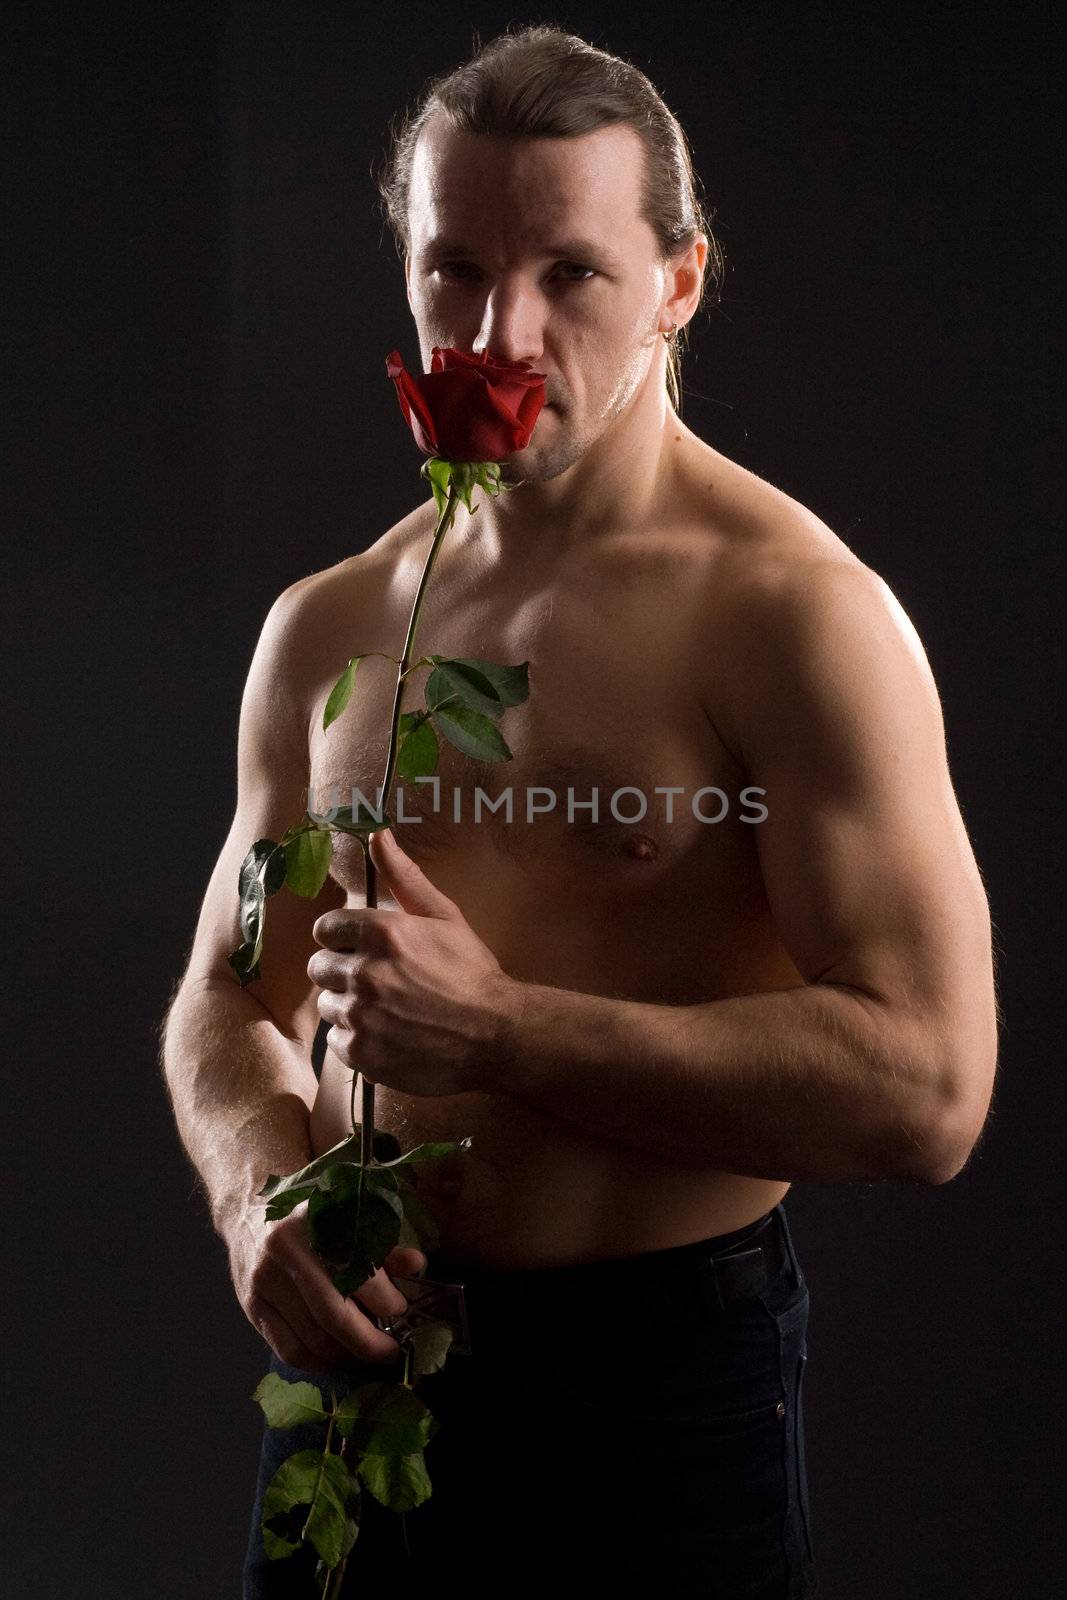 standing romantic man with red rose
